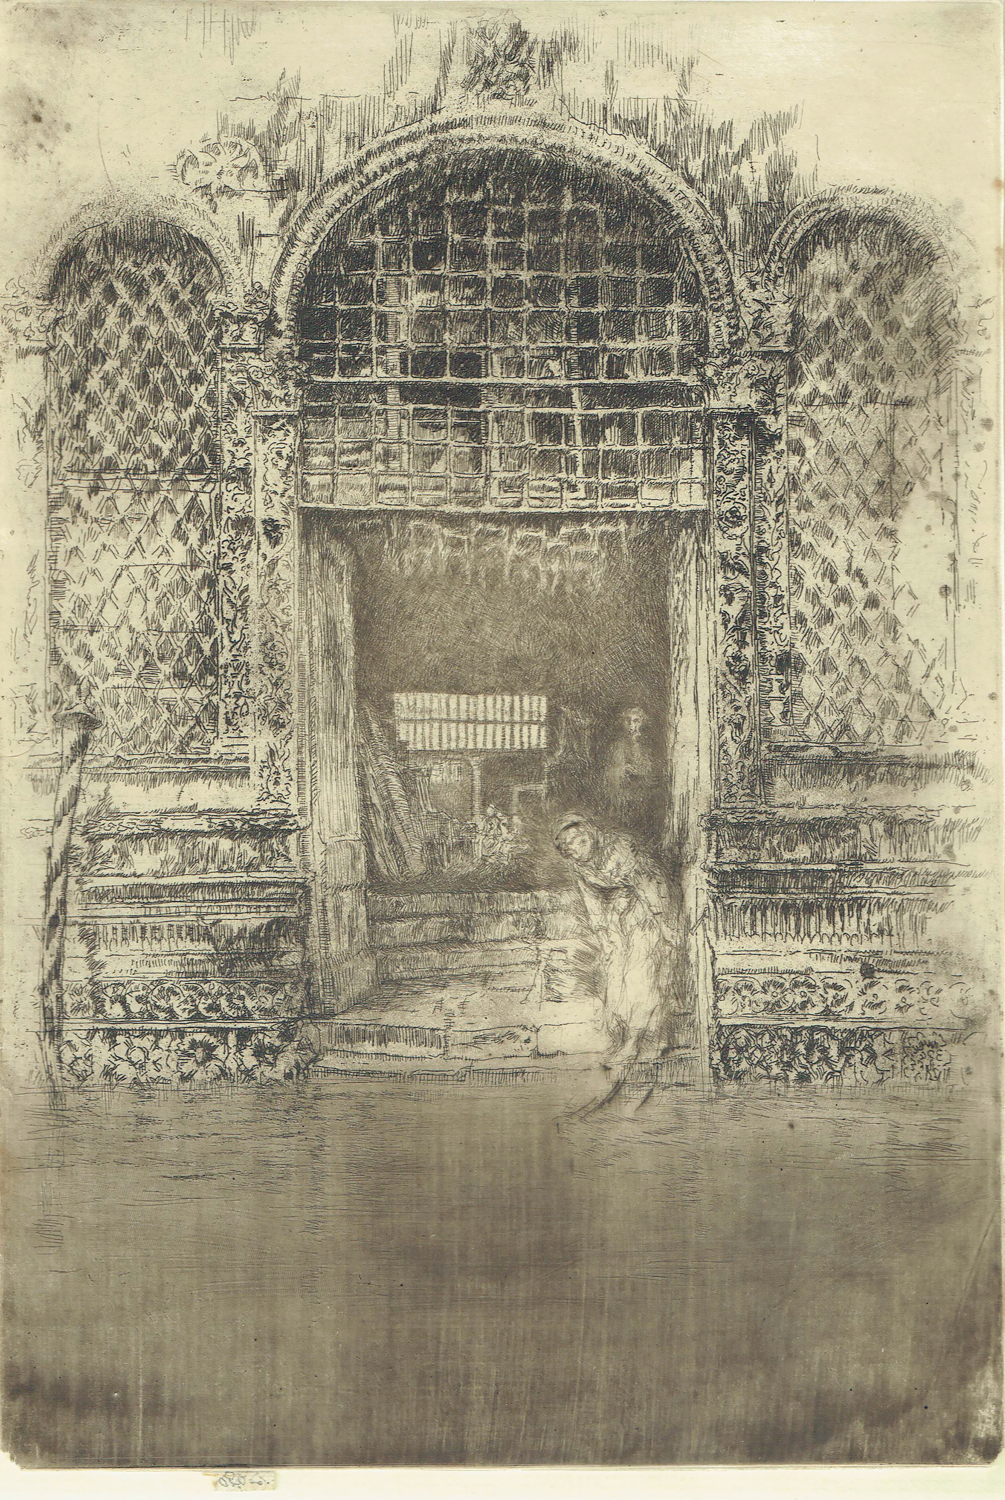 James McNeill Whistler, The Doorway, 1879, etching, drypoint and roulette